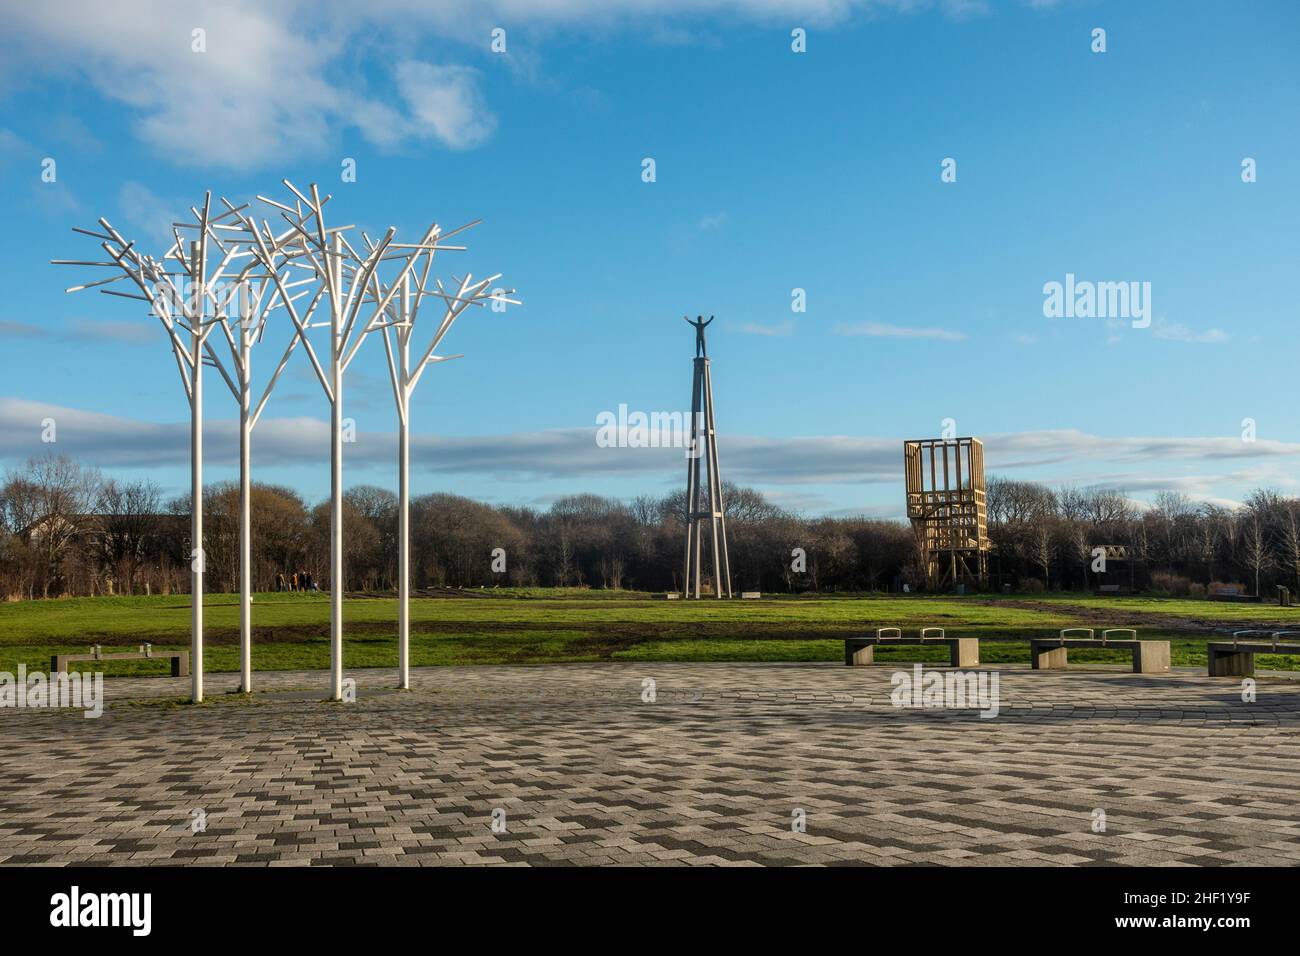 Artworks including sculptural trees, the Hope Sculpture by Steuart Padwick and The Tur lookout platform in the Cuningar Loop, Glasgow. Stock Photo